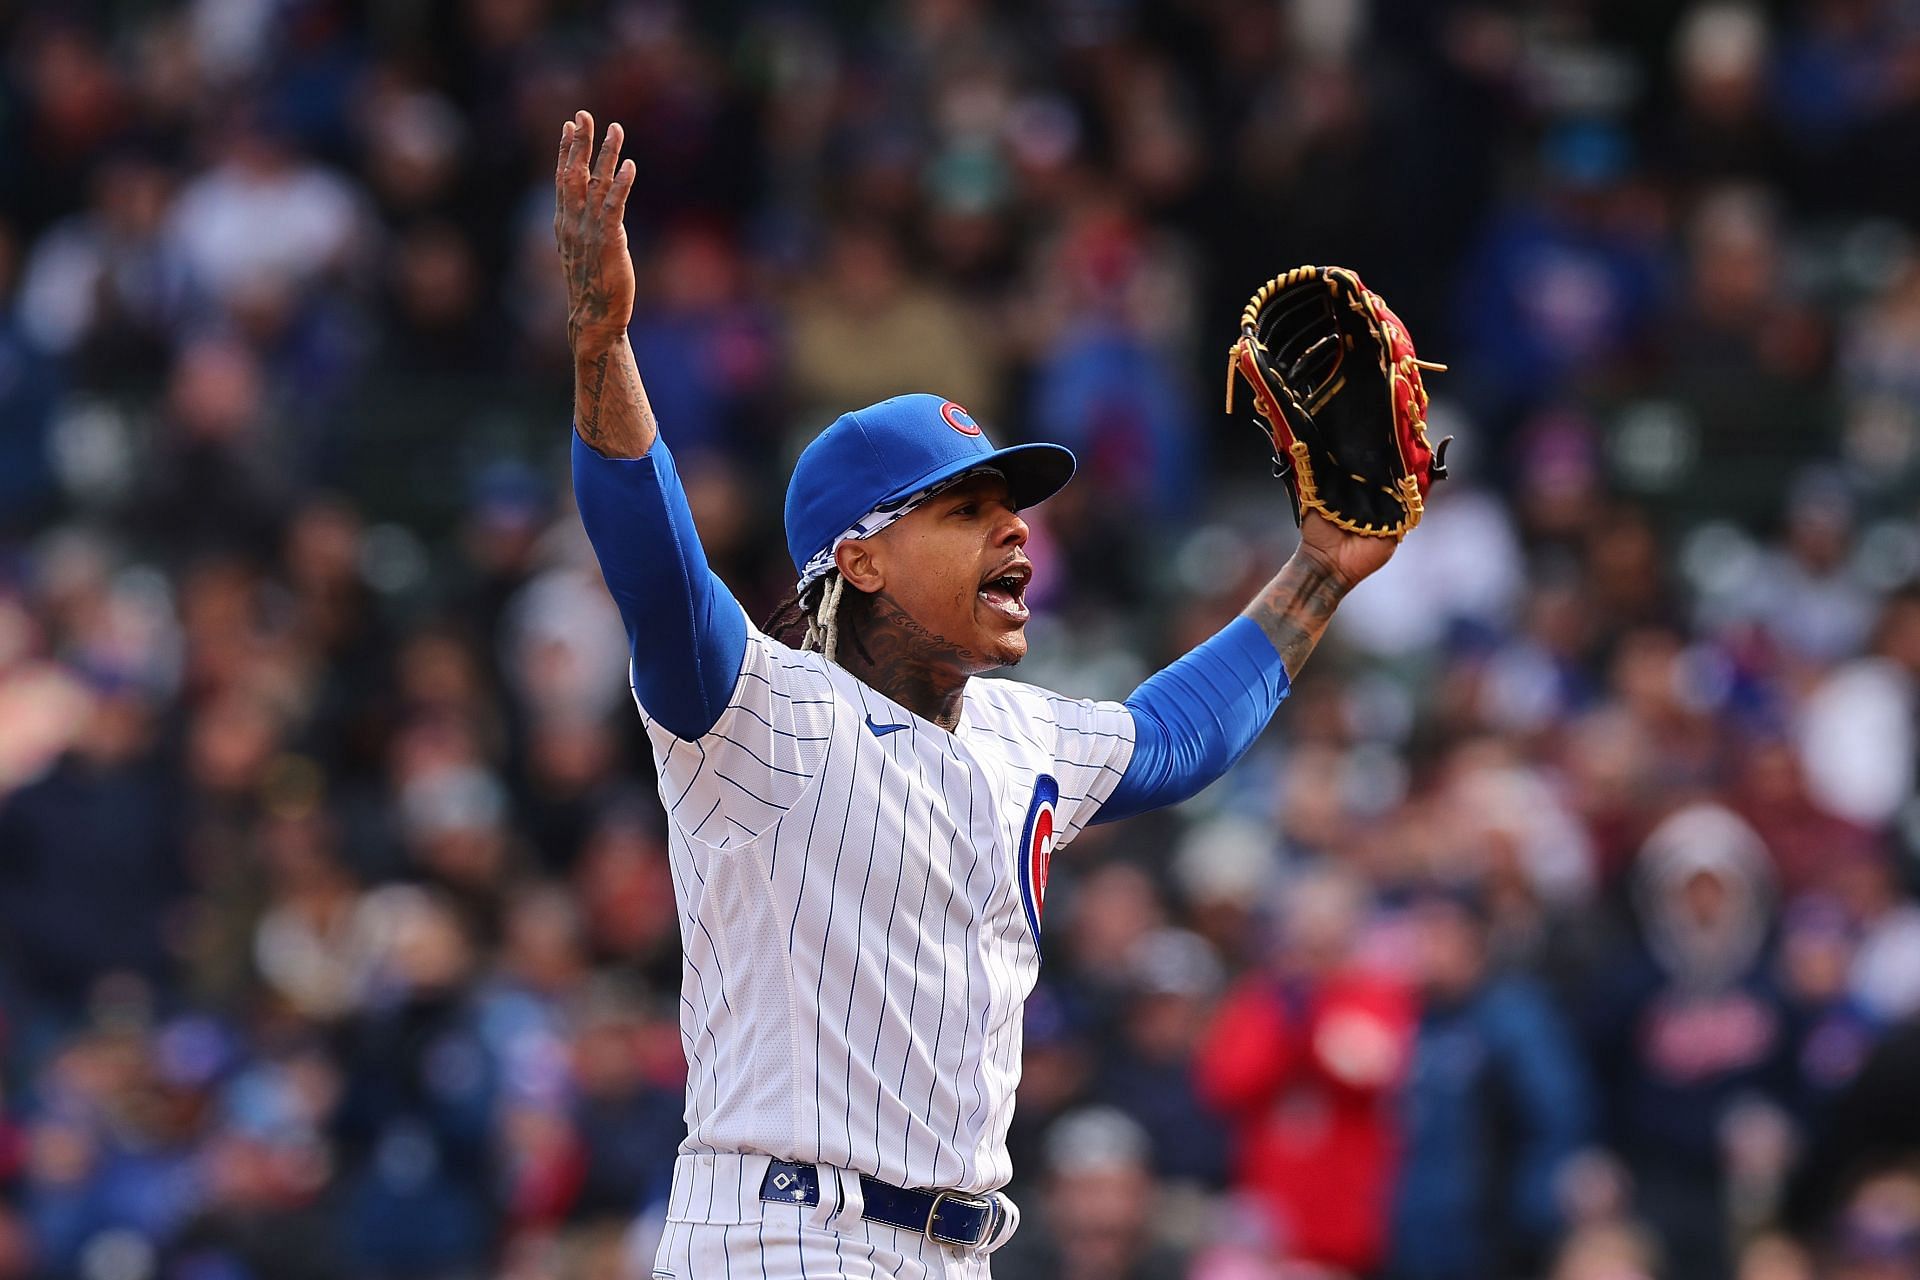 The Stro Show continues early for the Cubs in 2023 